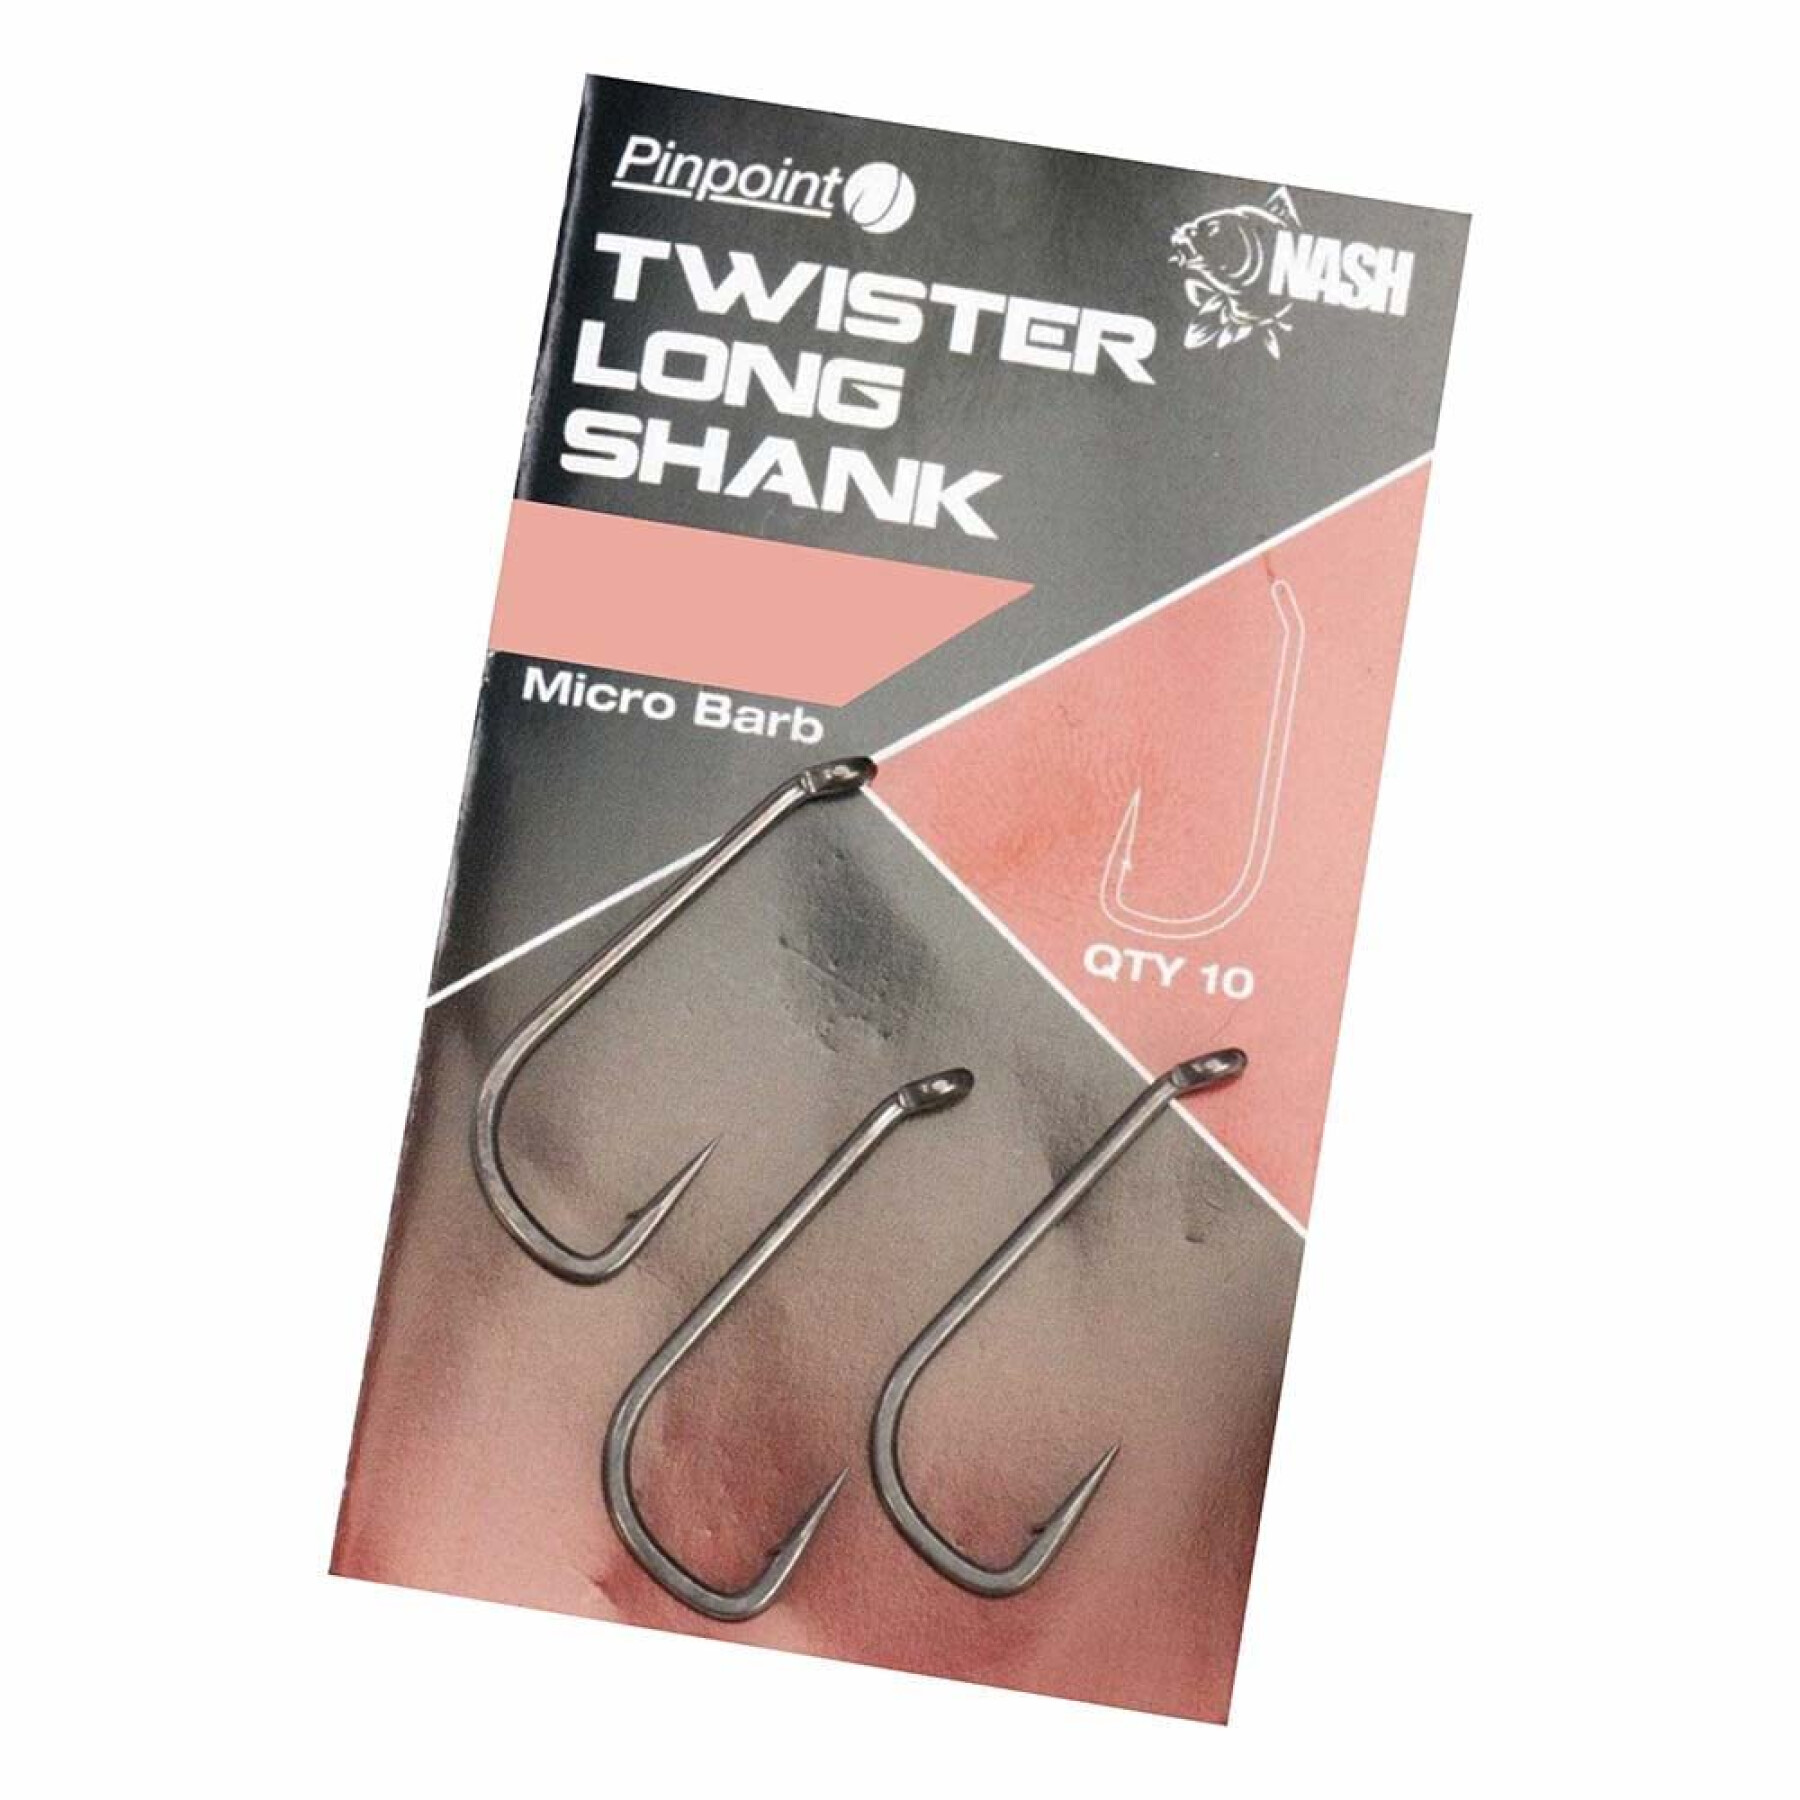 Gancio Pinpoint twister long shank taille 6 Micro Barbed